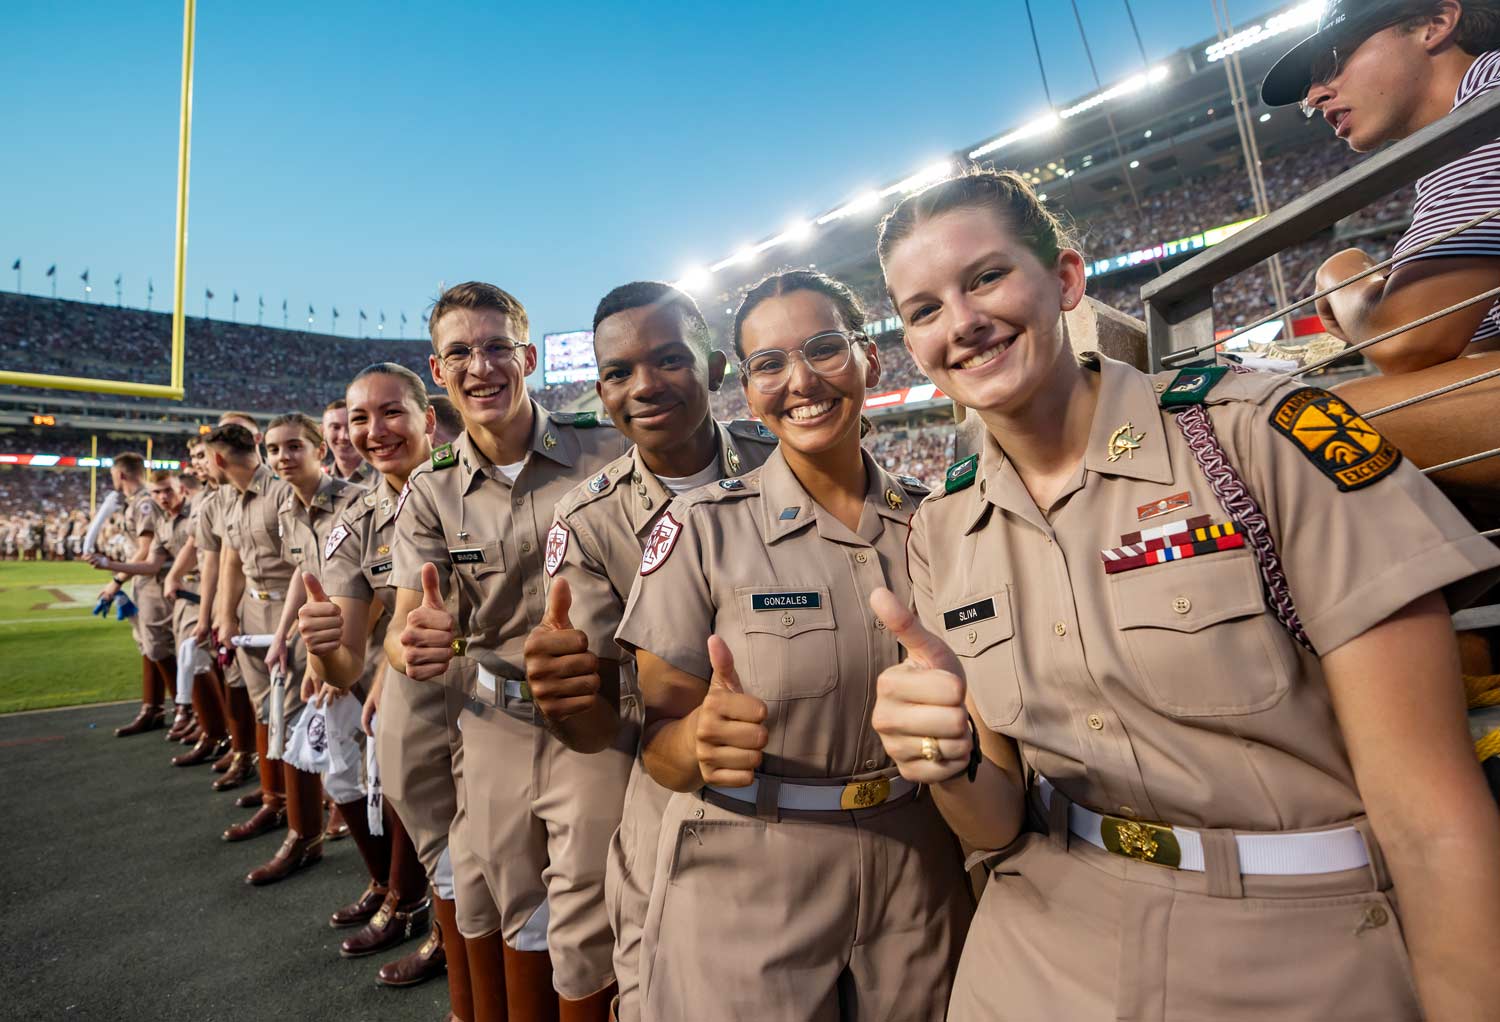 Corps of Cadets members posing at a football game